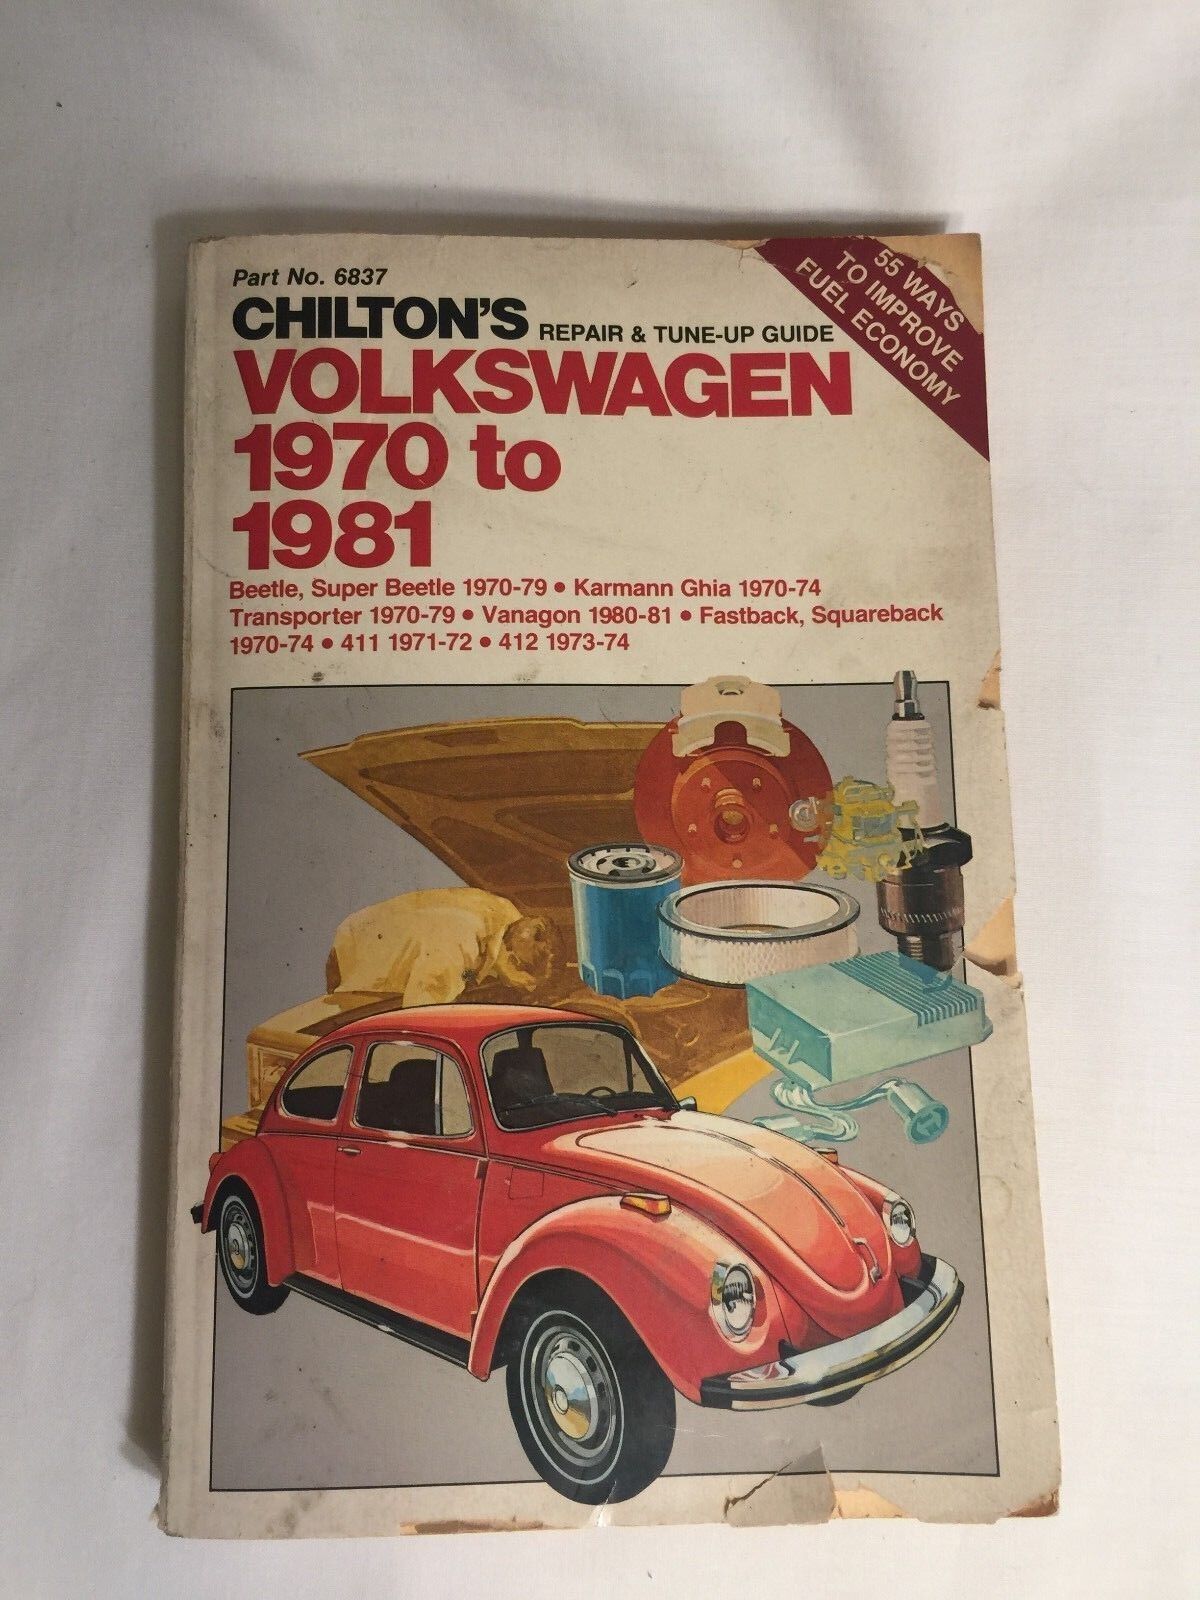  VINTAGE CHILTONS VOLKSWAGEN REPAIR AND TUNE UP GUIDE FOR 1970-1981 MODELS